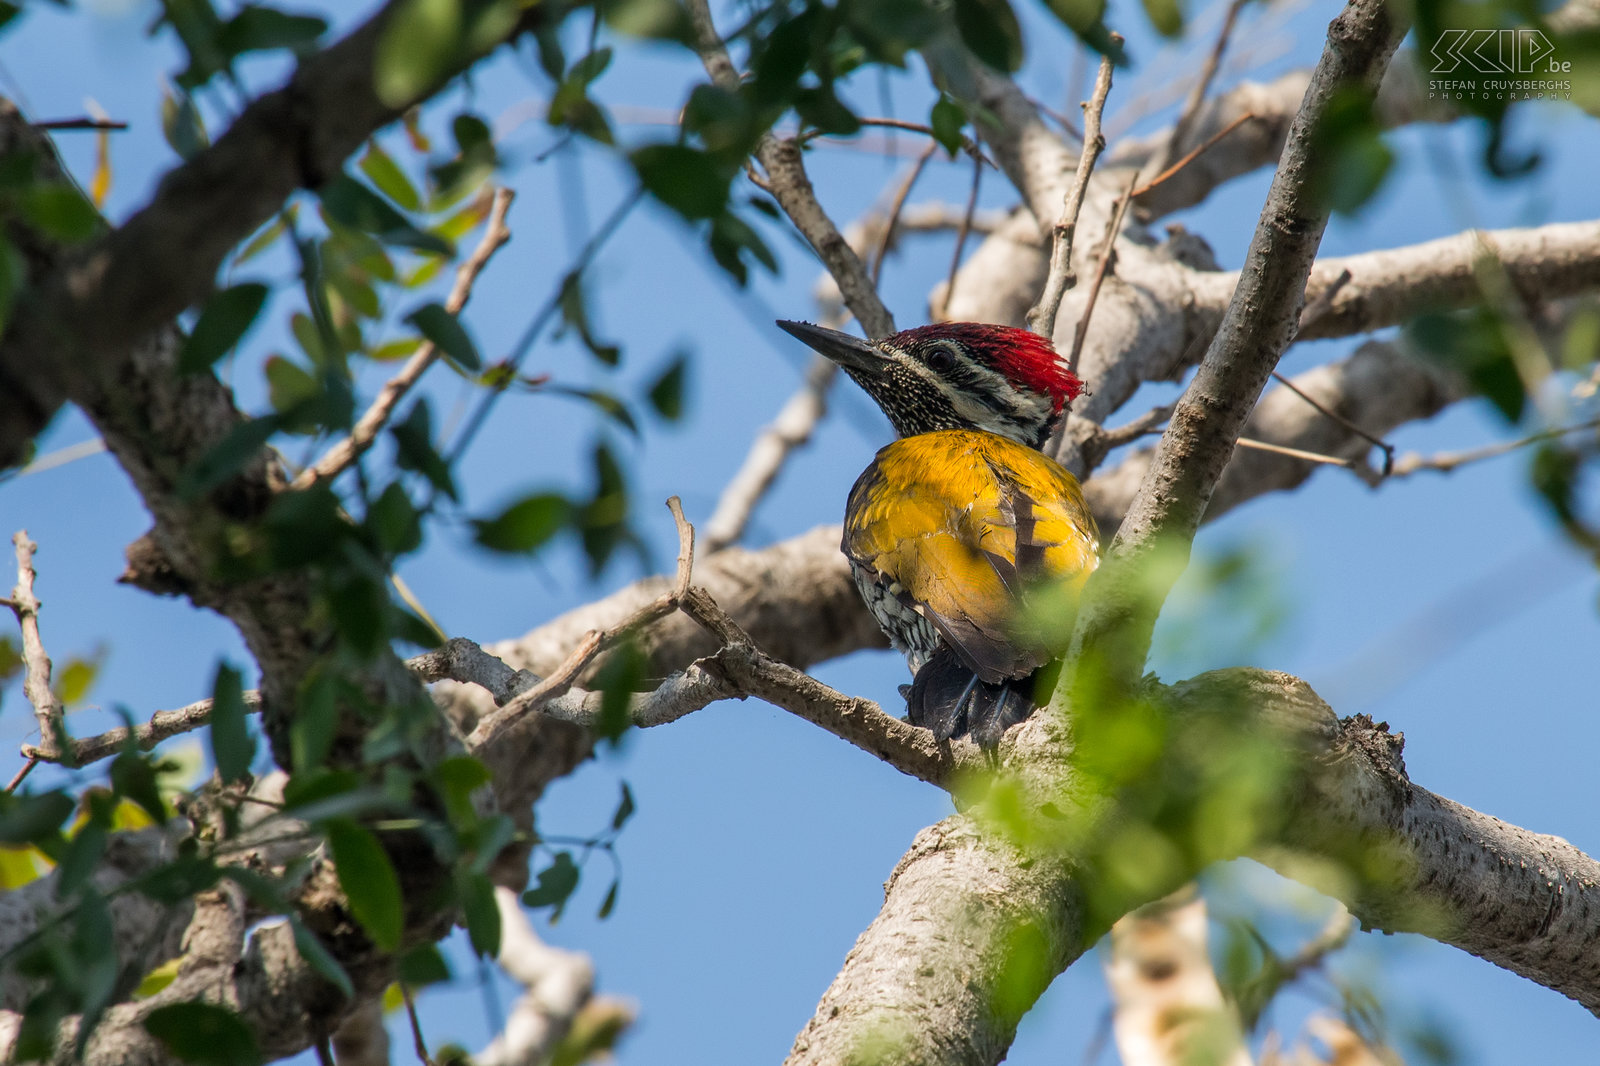 Keoladeo - White-naped woodpecker A beautiful woodpecker with red head and yellow back (Chrysocolaptes festivus). Stefan Cruysberghs